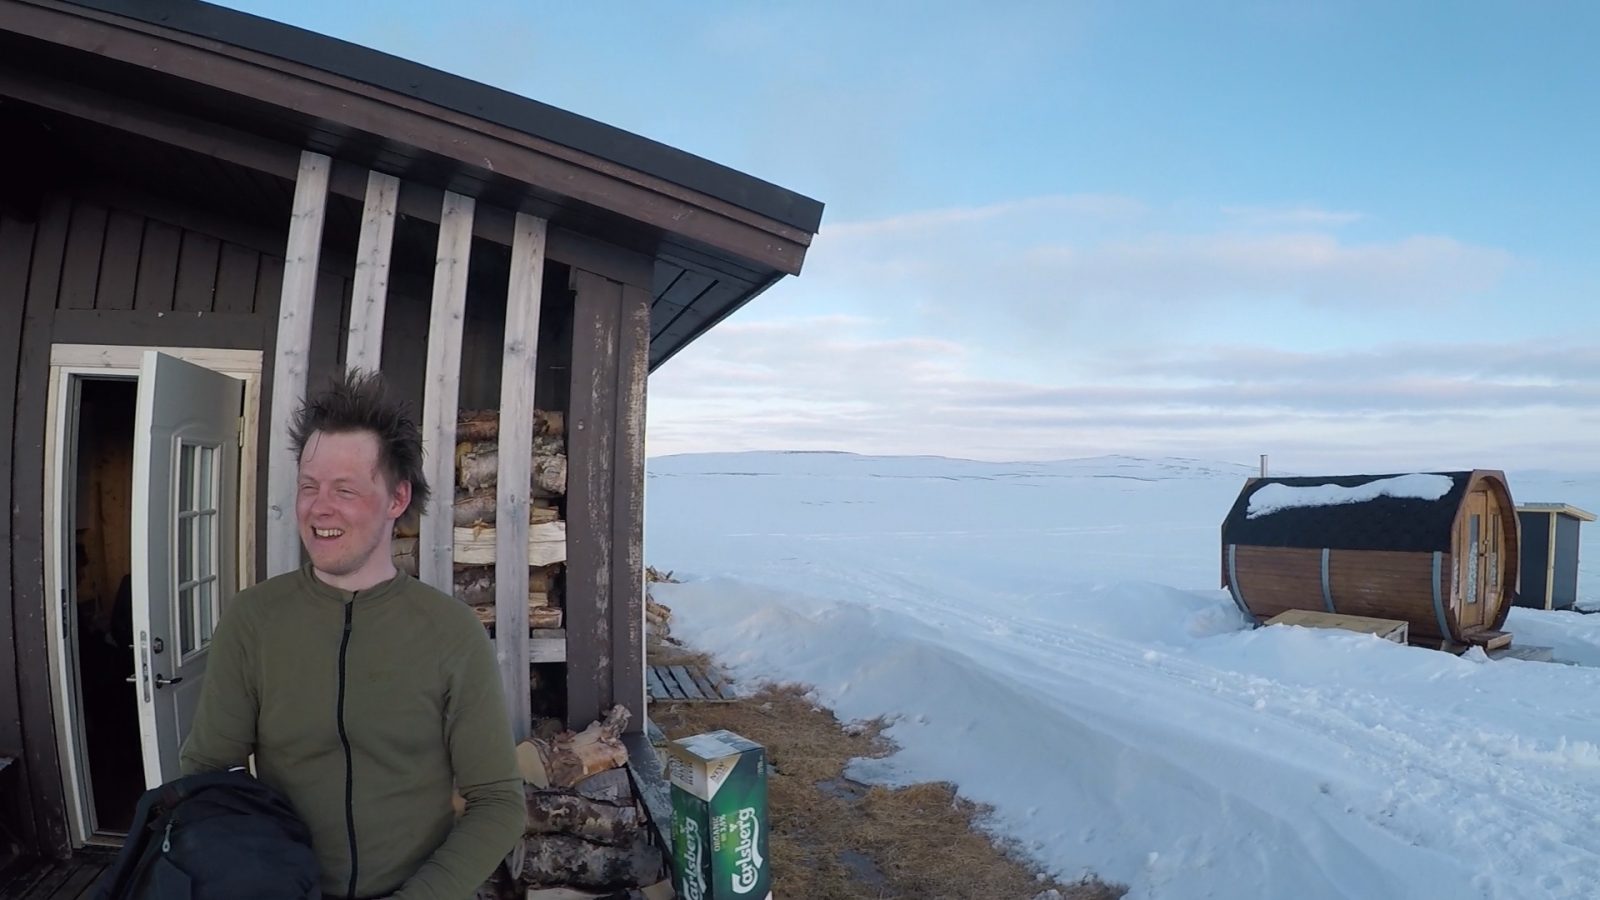 A man emerges from a sauna in the Arctic.